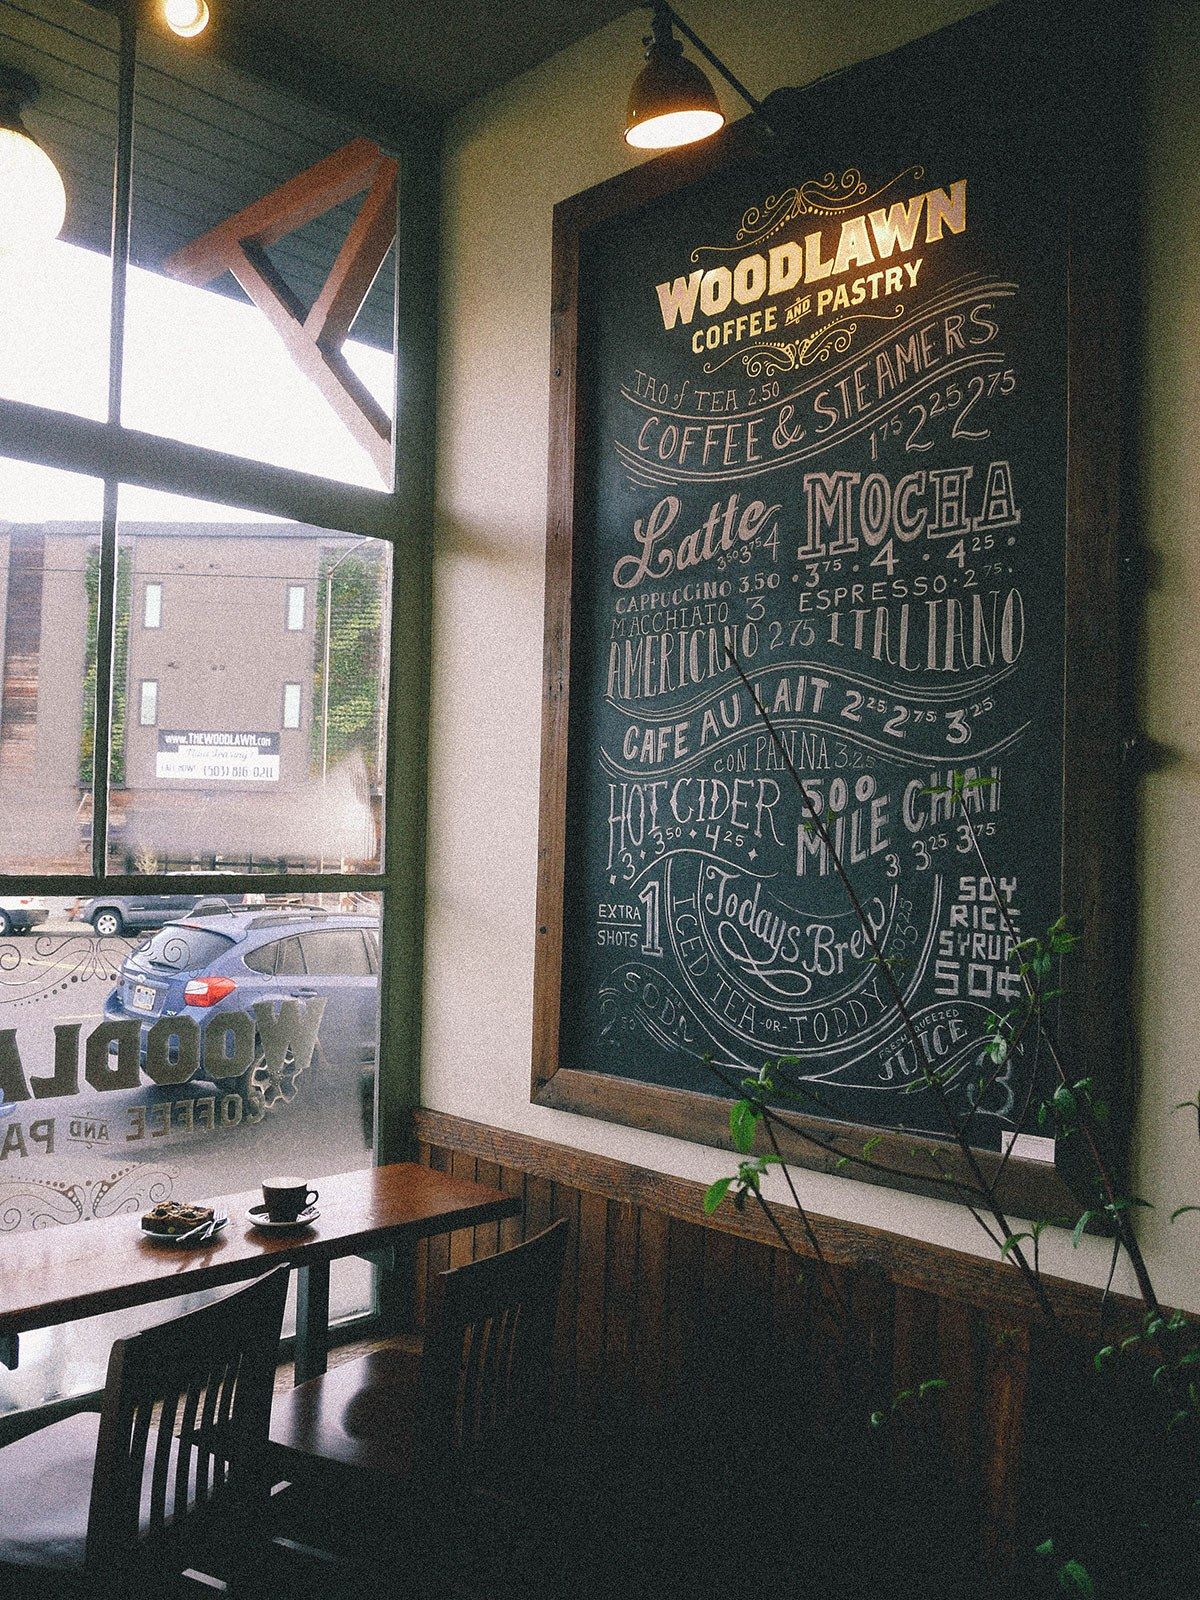 Woodlawn Coffee & Pastry